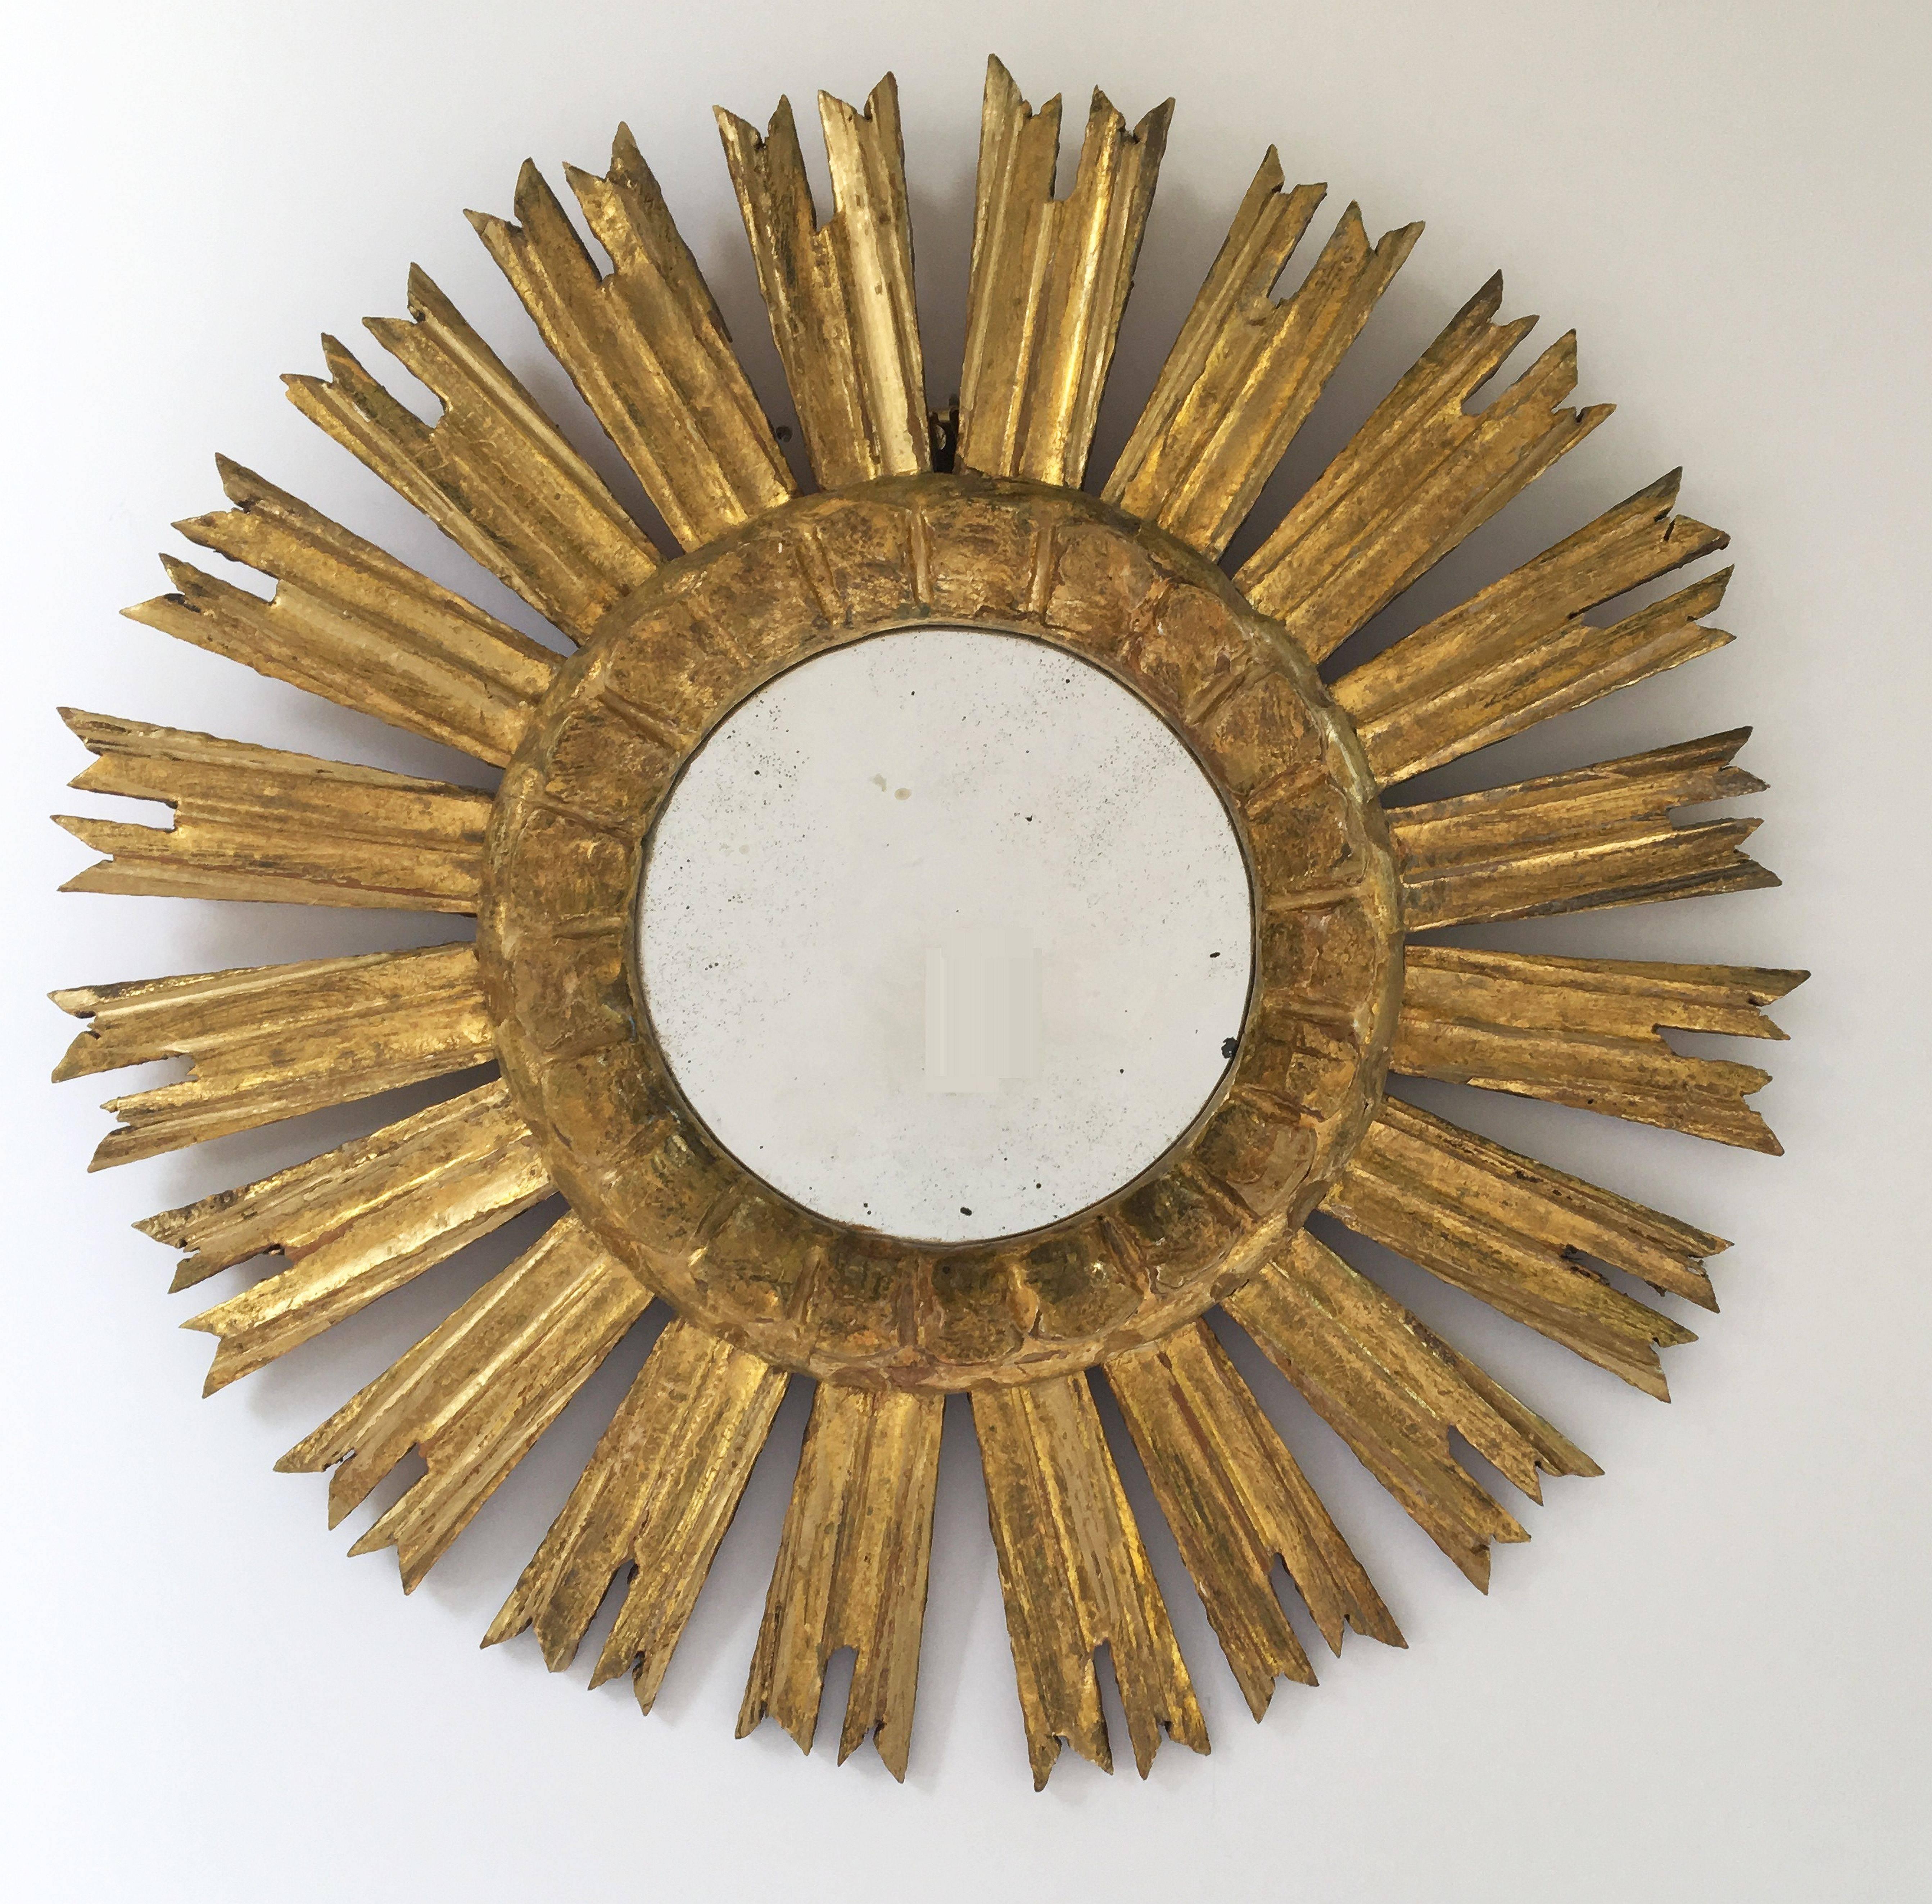 A lovely French gilt sunburst (or starburst) mirror, 16 1/2 inches diameter, with mirrored glass center in moulded frame.

